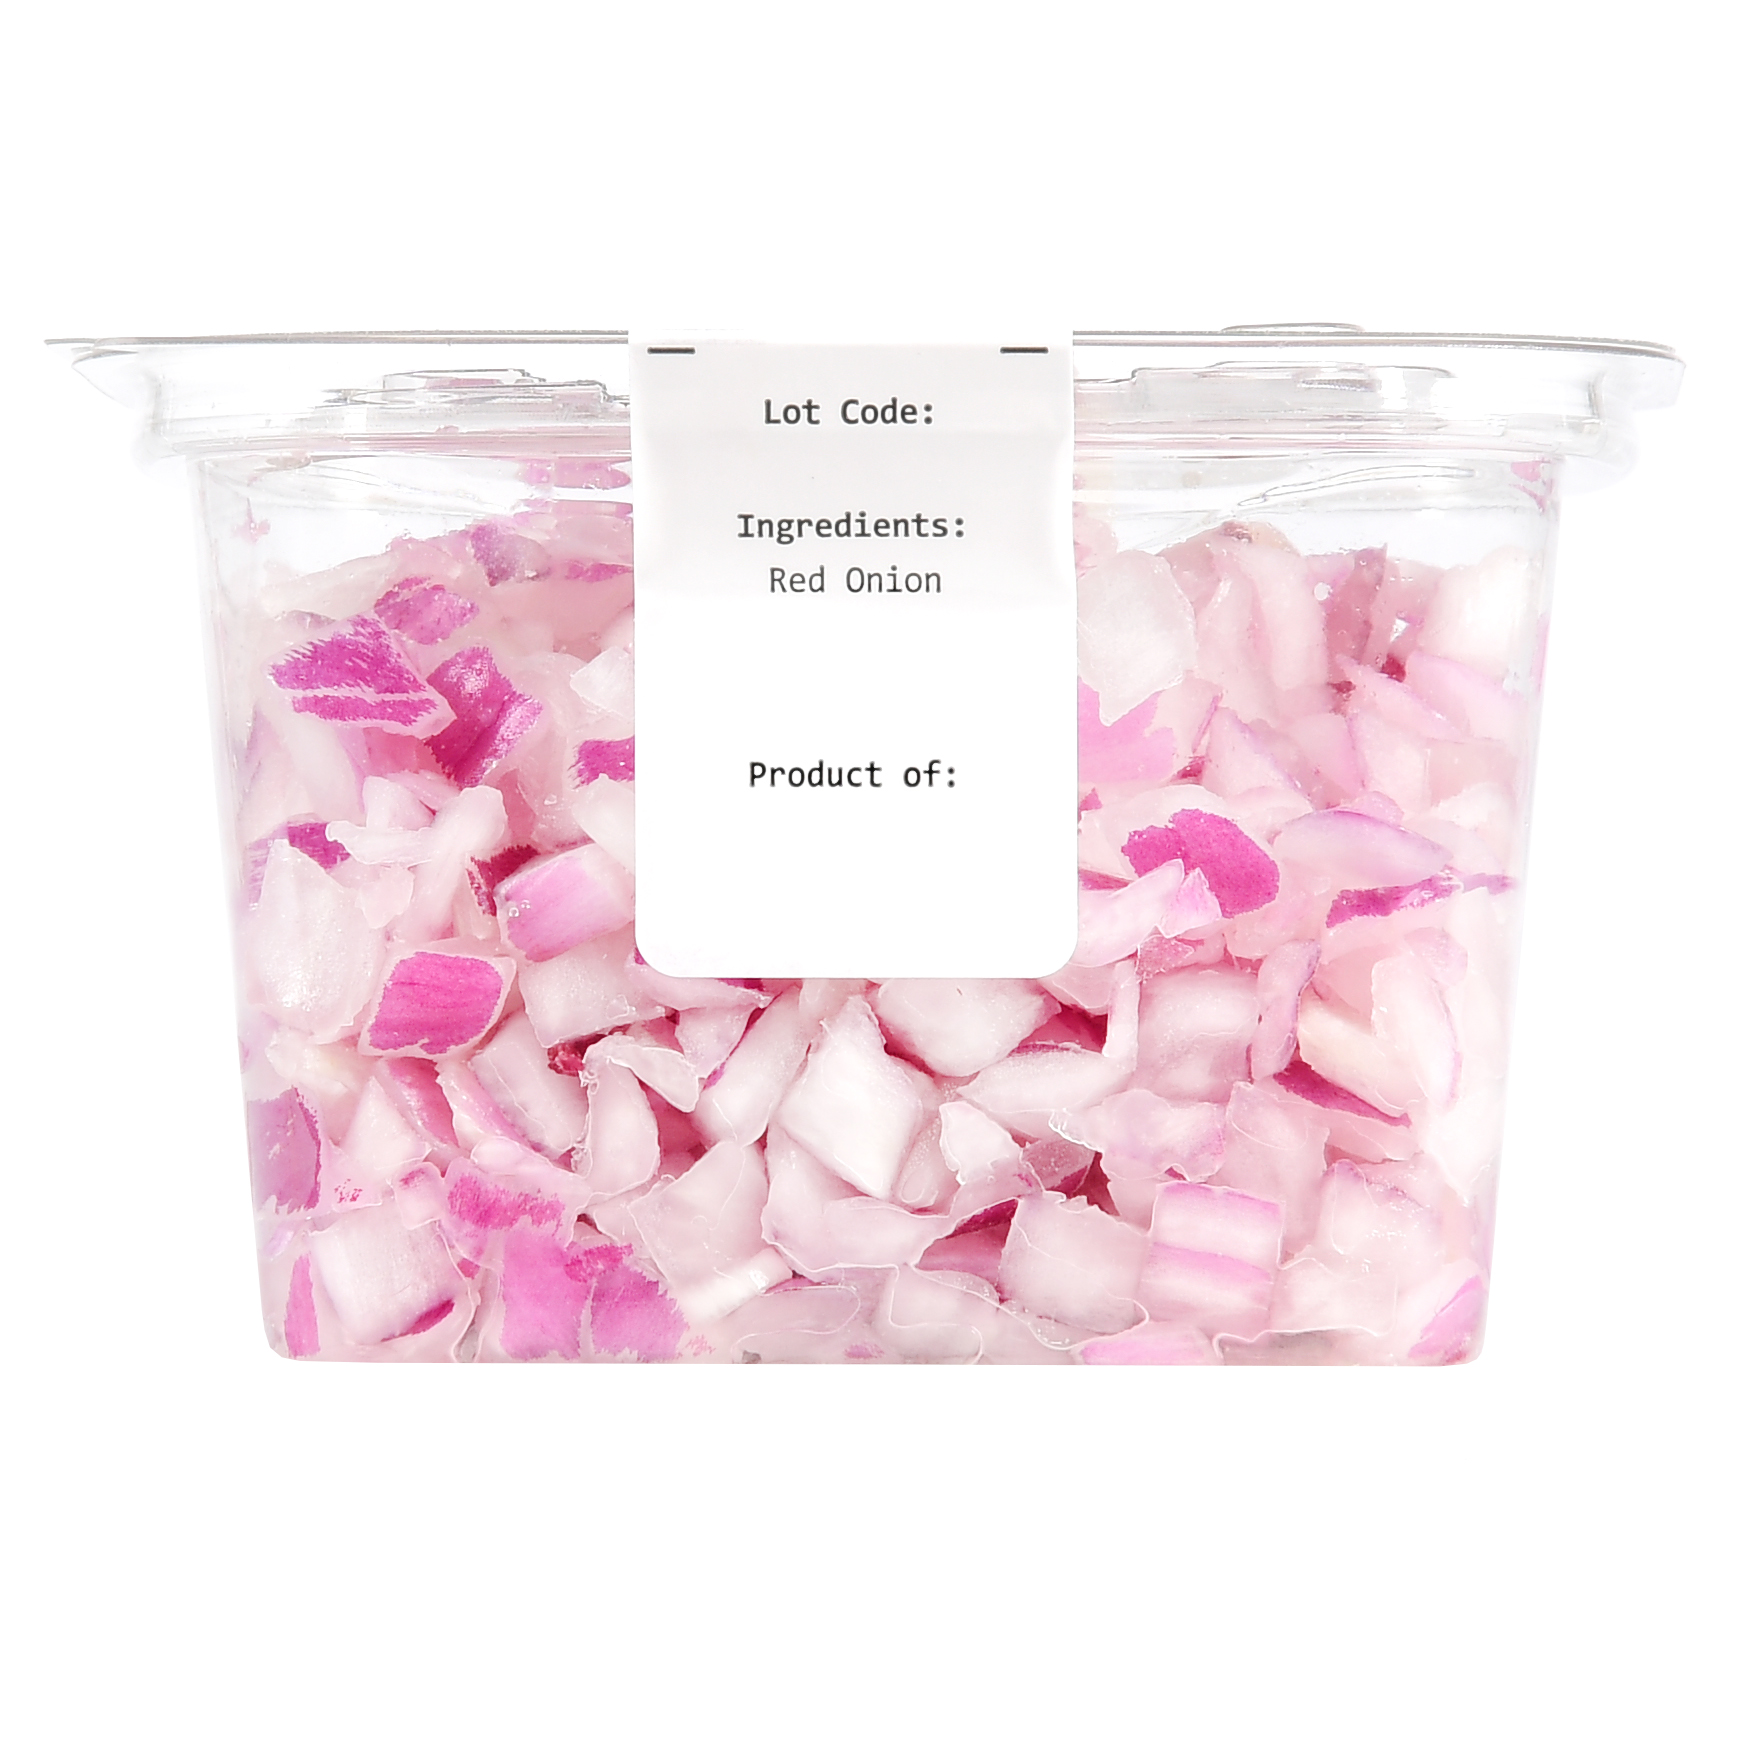 Freshness Guaranteed Diced Red Onions, 8 oz - image 3 of 5